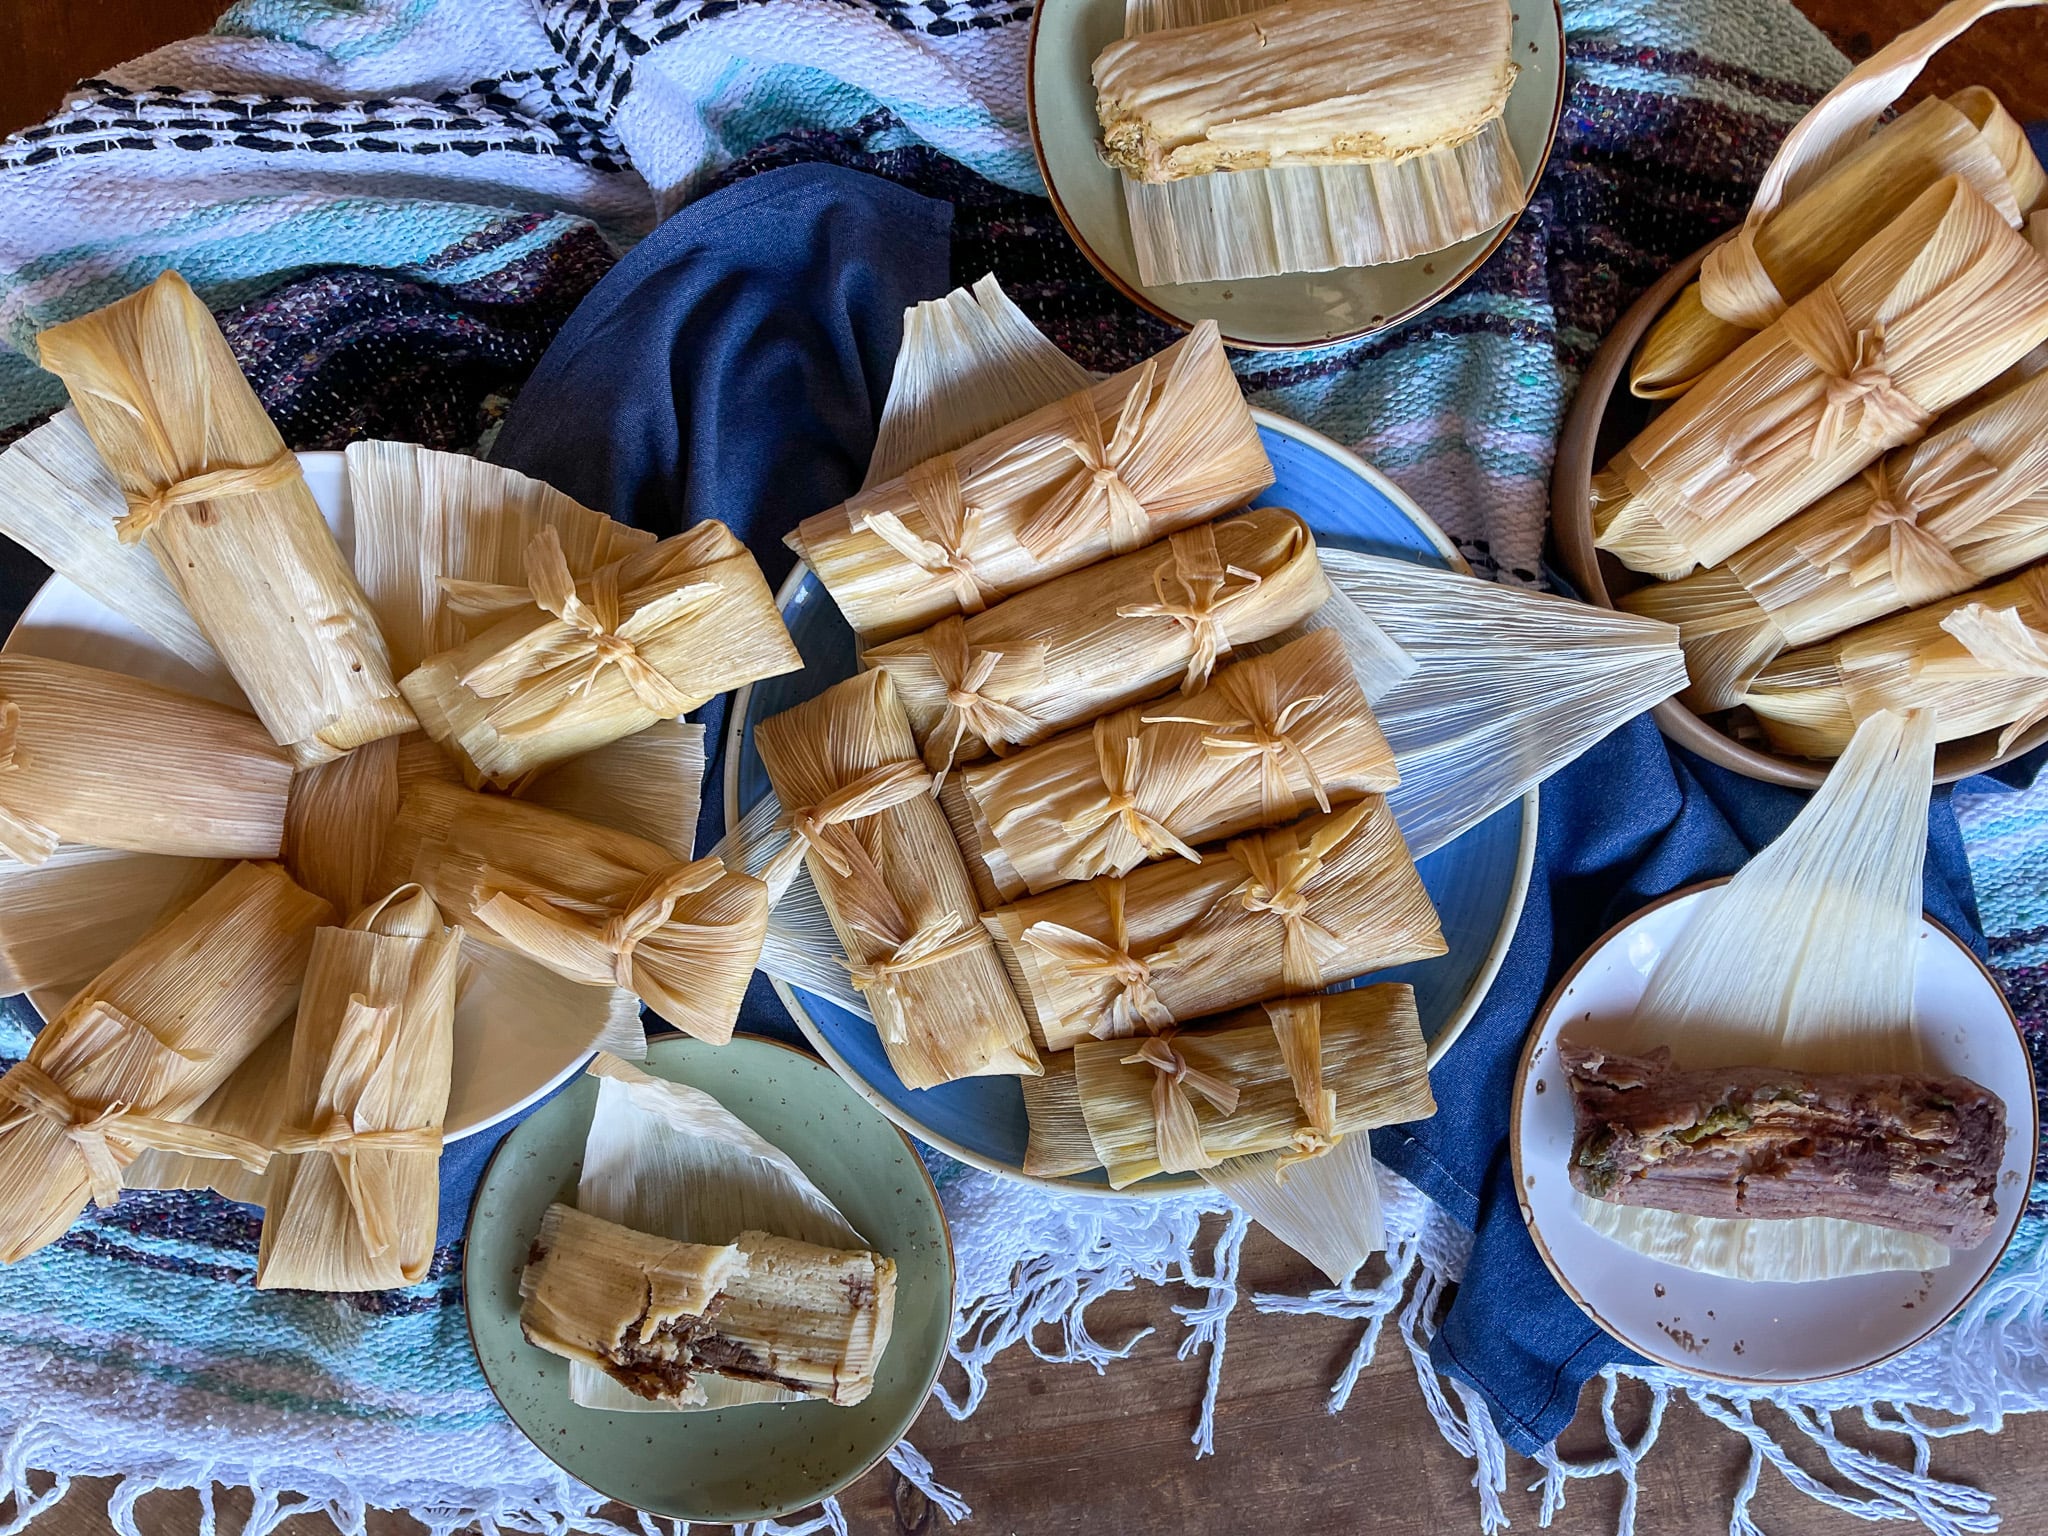 Tallula's Executive Chef Juan Robles is showcasing his family’s tamale recipes in what’s become an annual tradition for this beachside Mexican restaurant. Photo Credit: Meghan Reardon